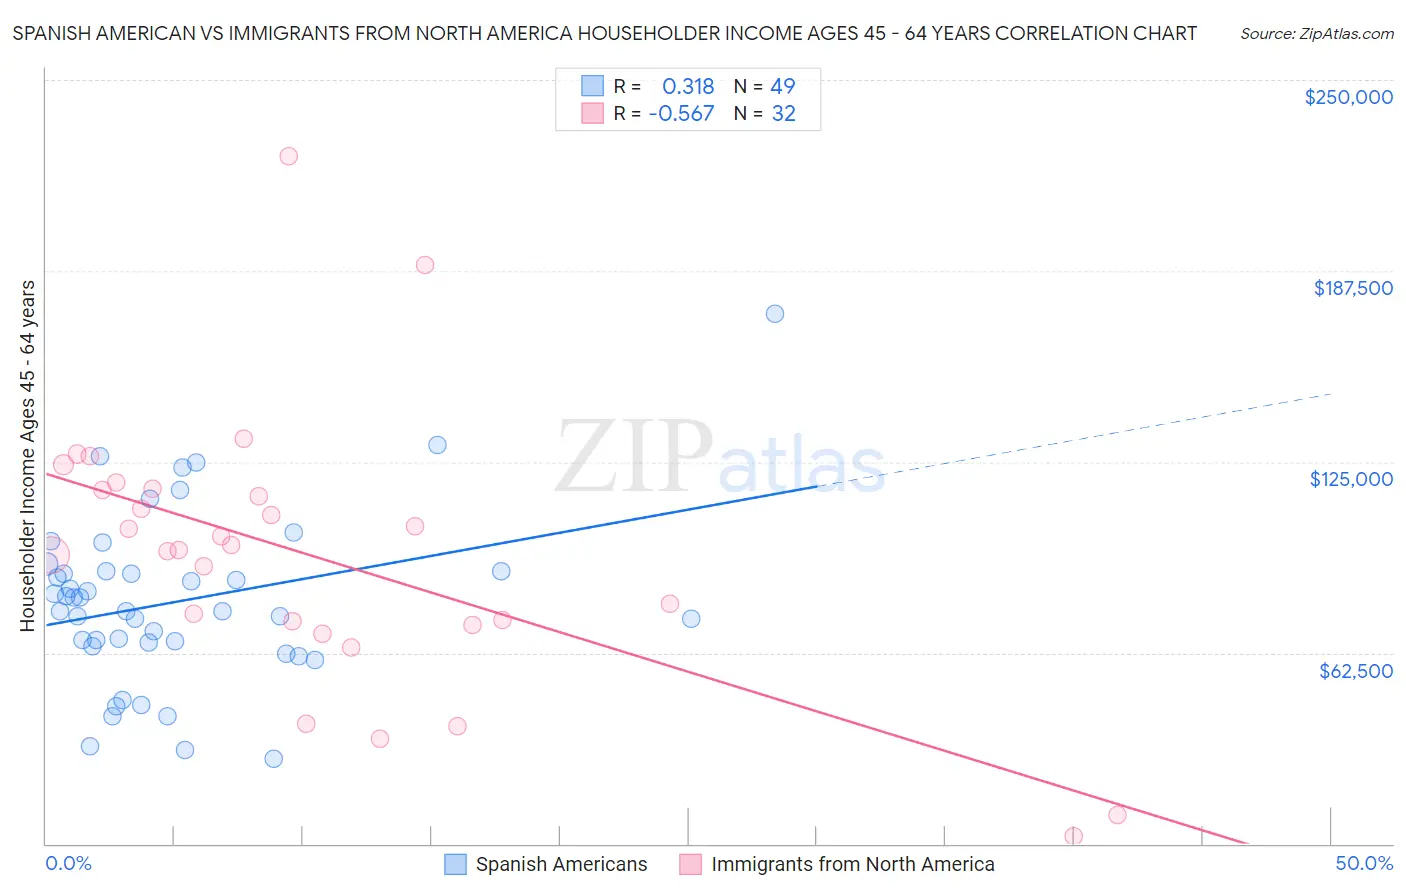 Spanish American vs Immigrants from North America Householder Income Ages 45 - 64 years